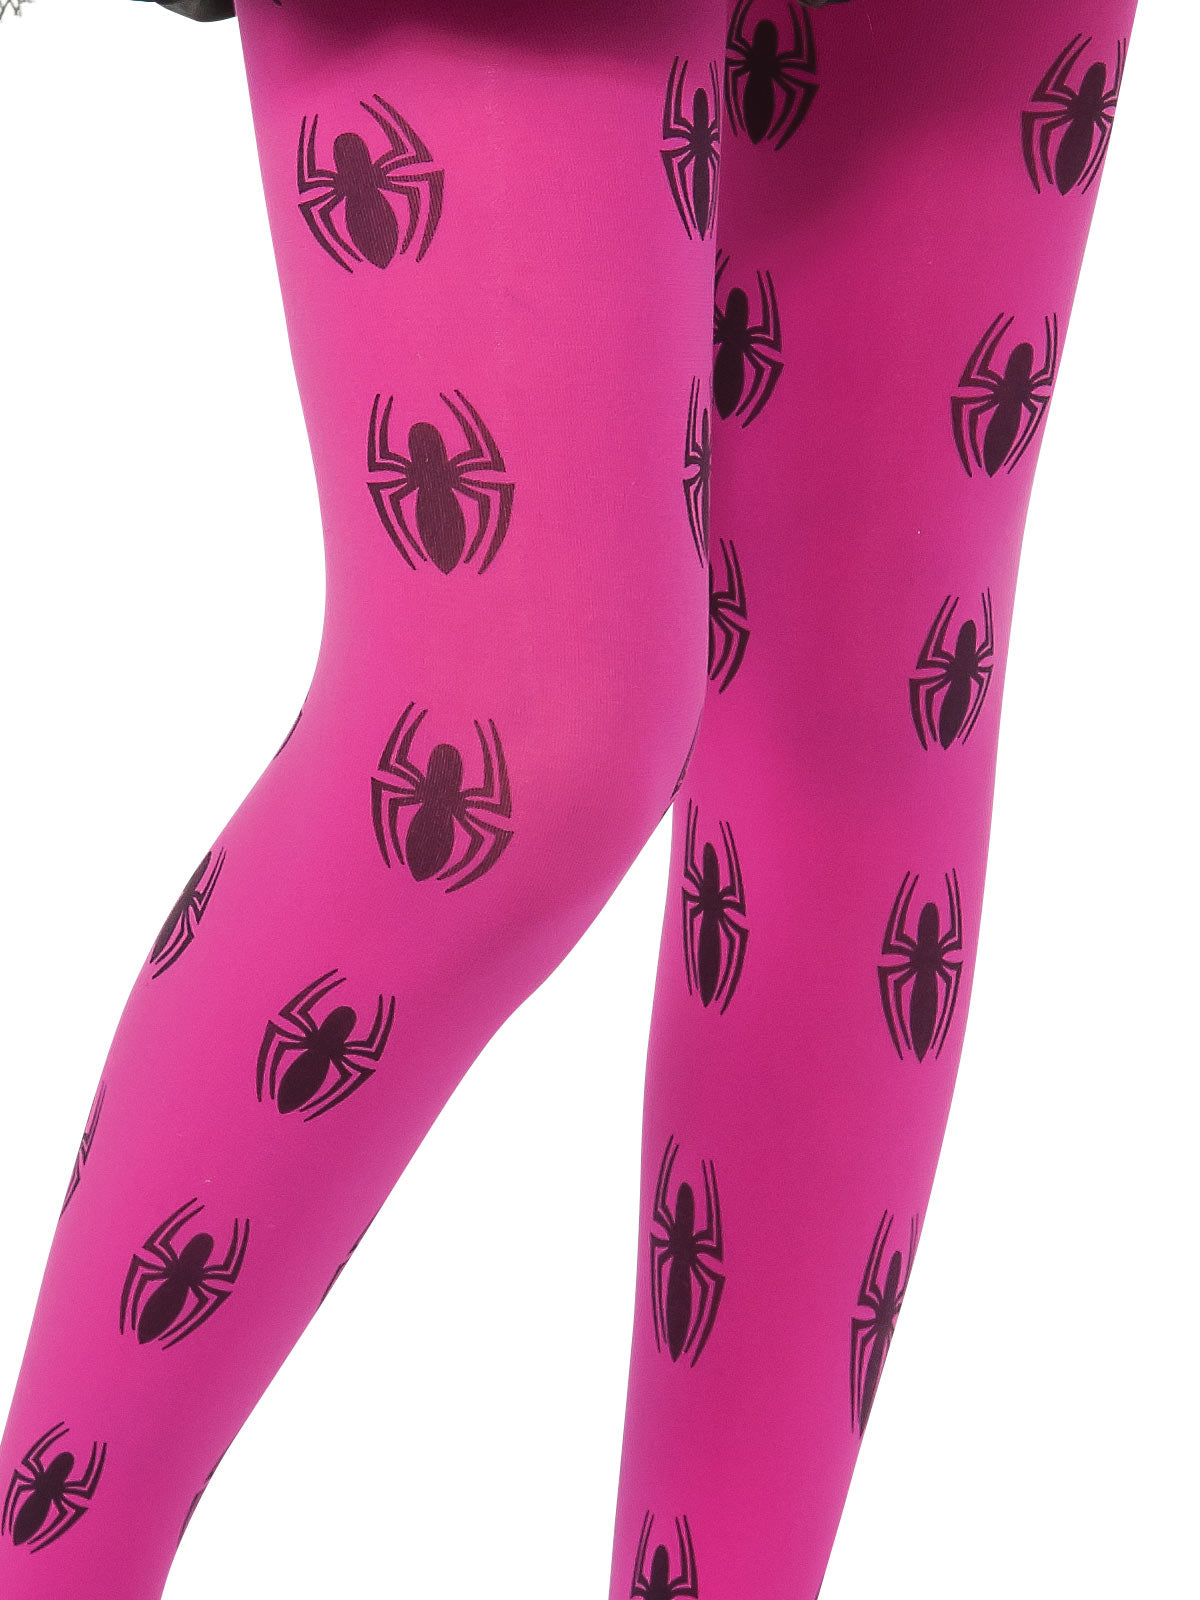 Hot Pink Tights, Accessories